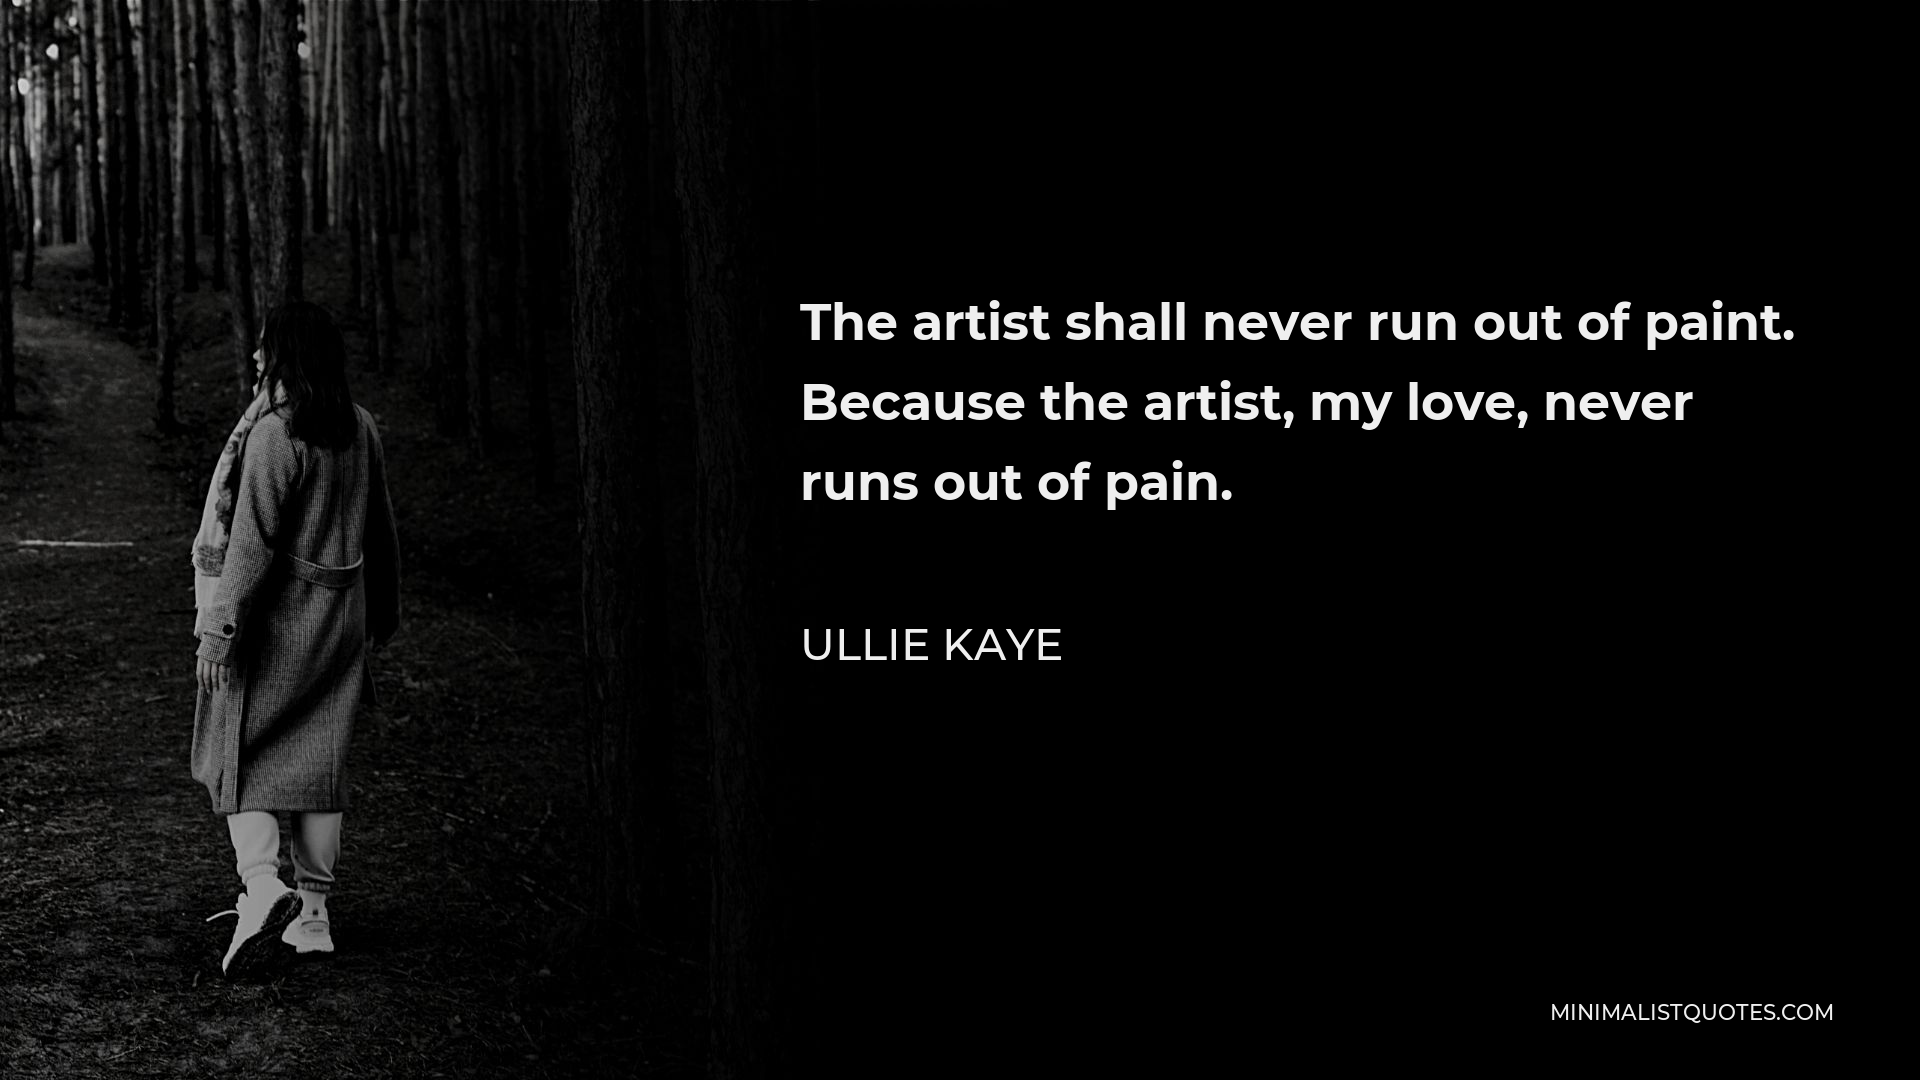 Ullie Kaye Quote - The artist shall never run out of paint. Because the artist, my love, never runs out of pain.